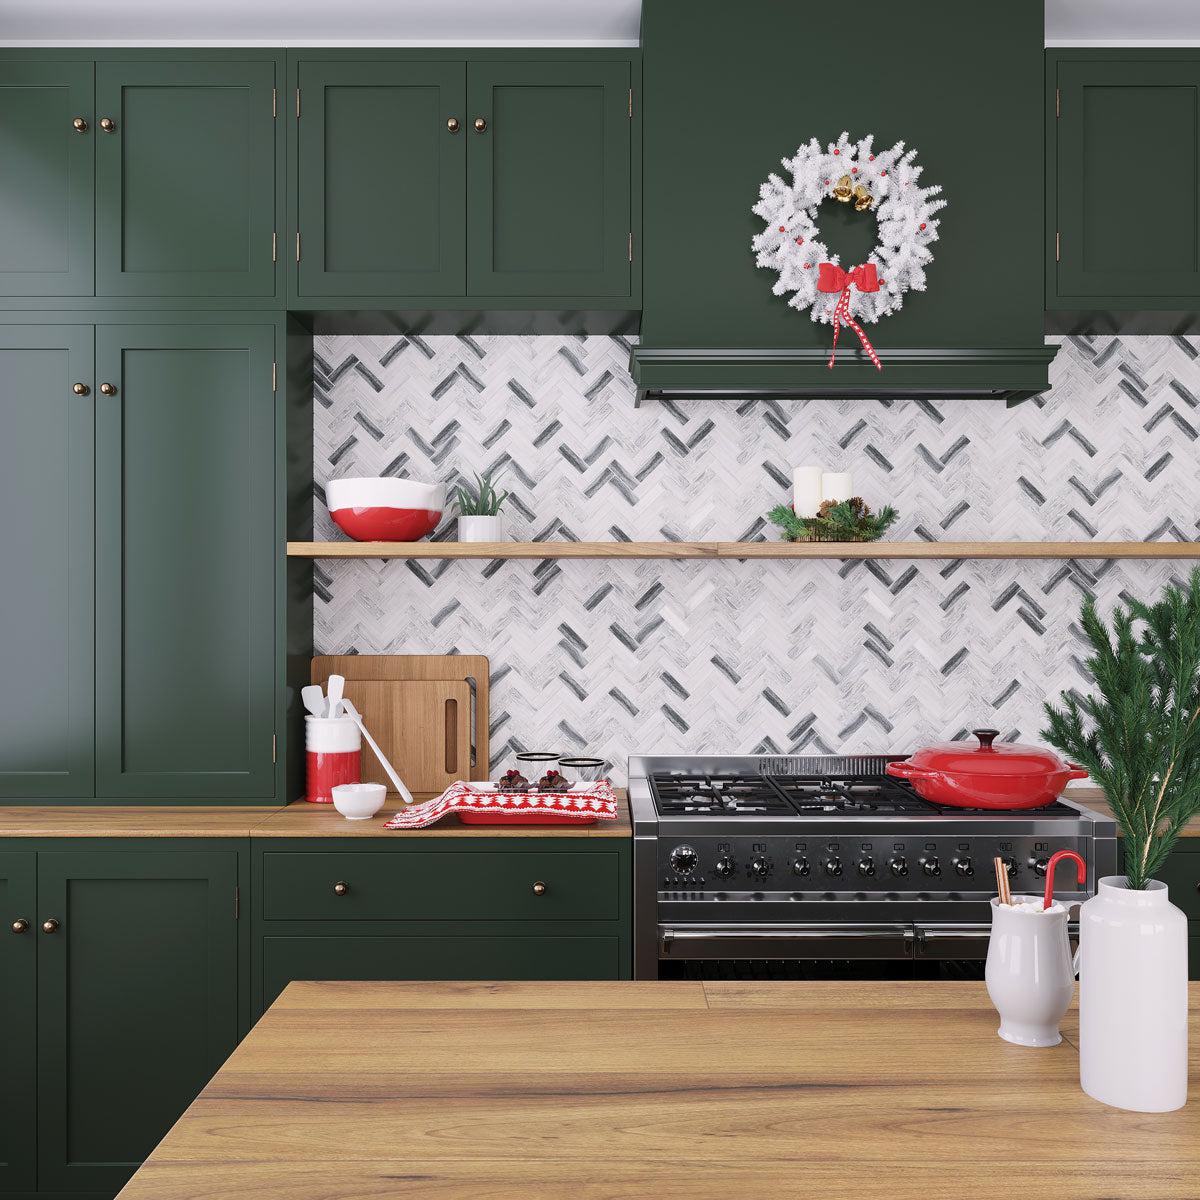 Dark green kitchen cabinets with recycled glass herringbone tile backsplash and neutral wood accents